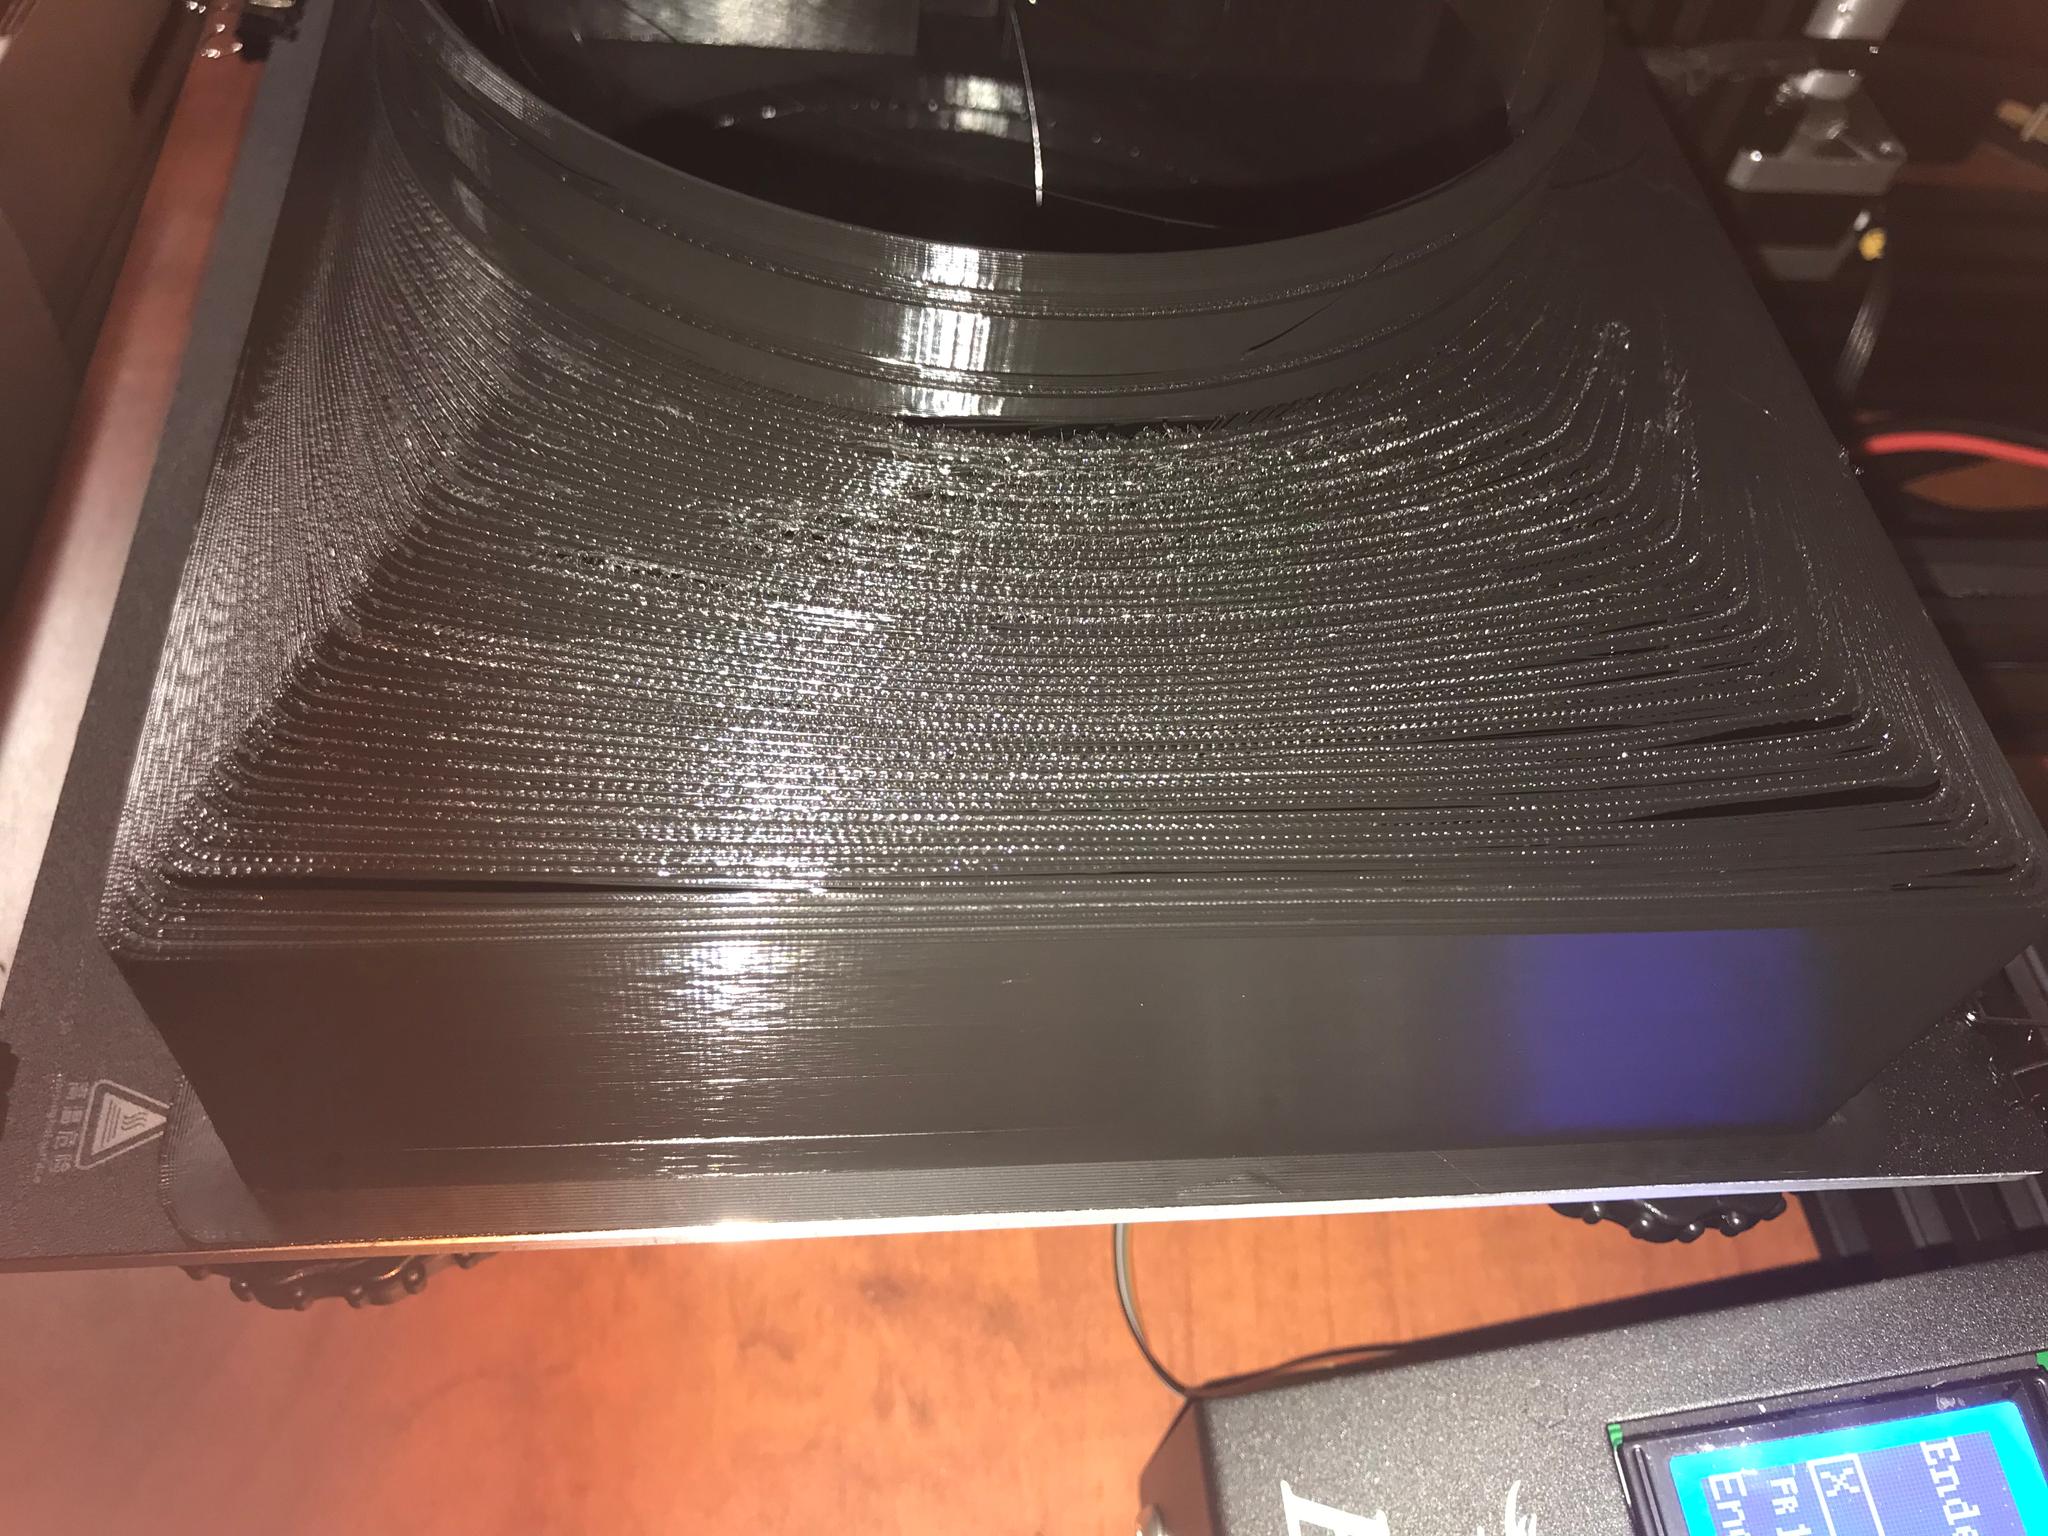 View of defects in funnel portion of print.